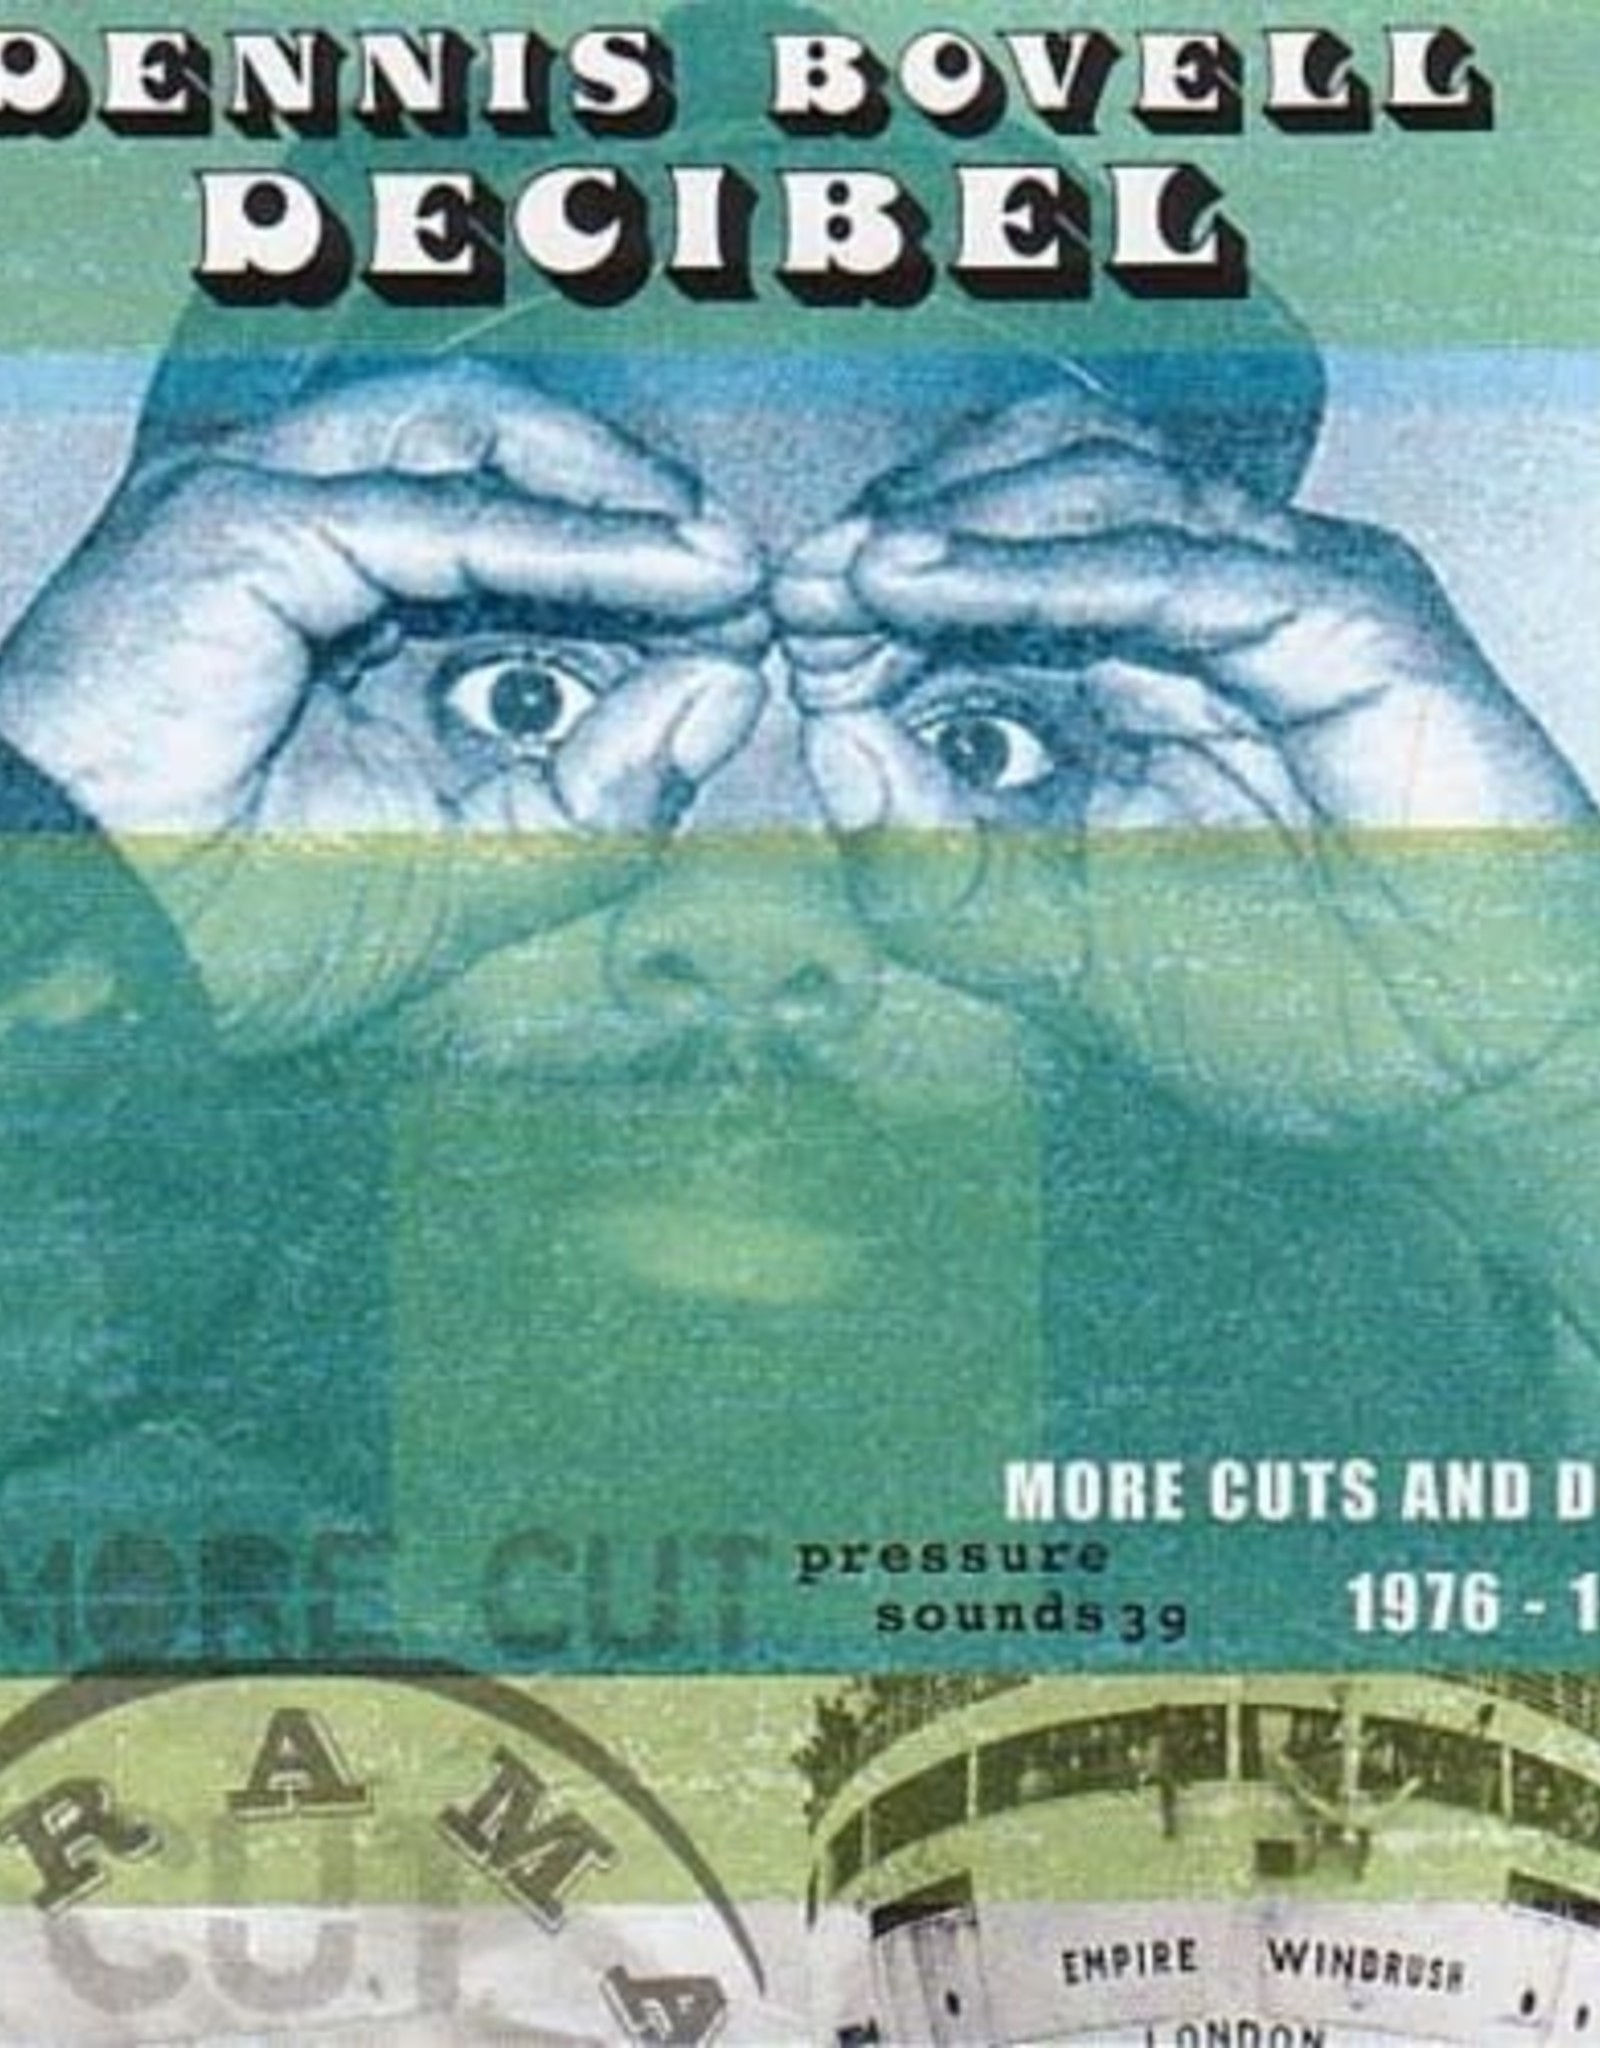 Decibel: More Cuts and Dubs from Dennis Bovell 1976-1983